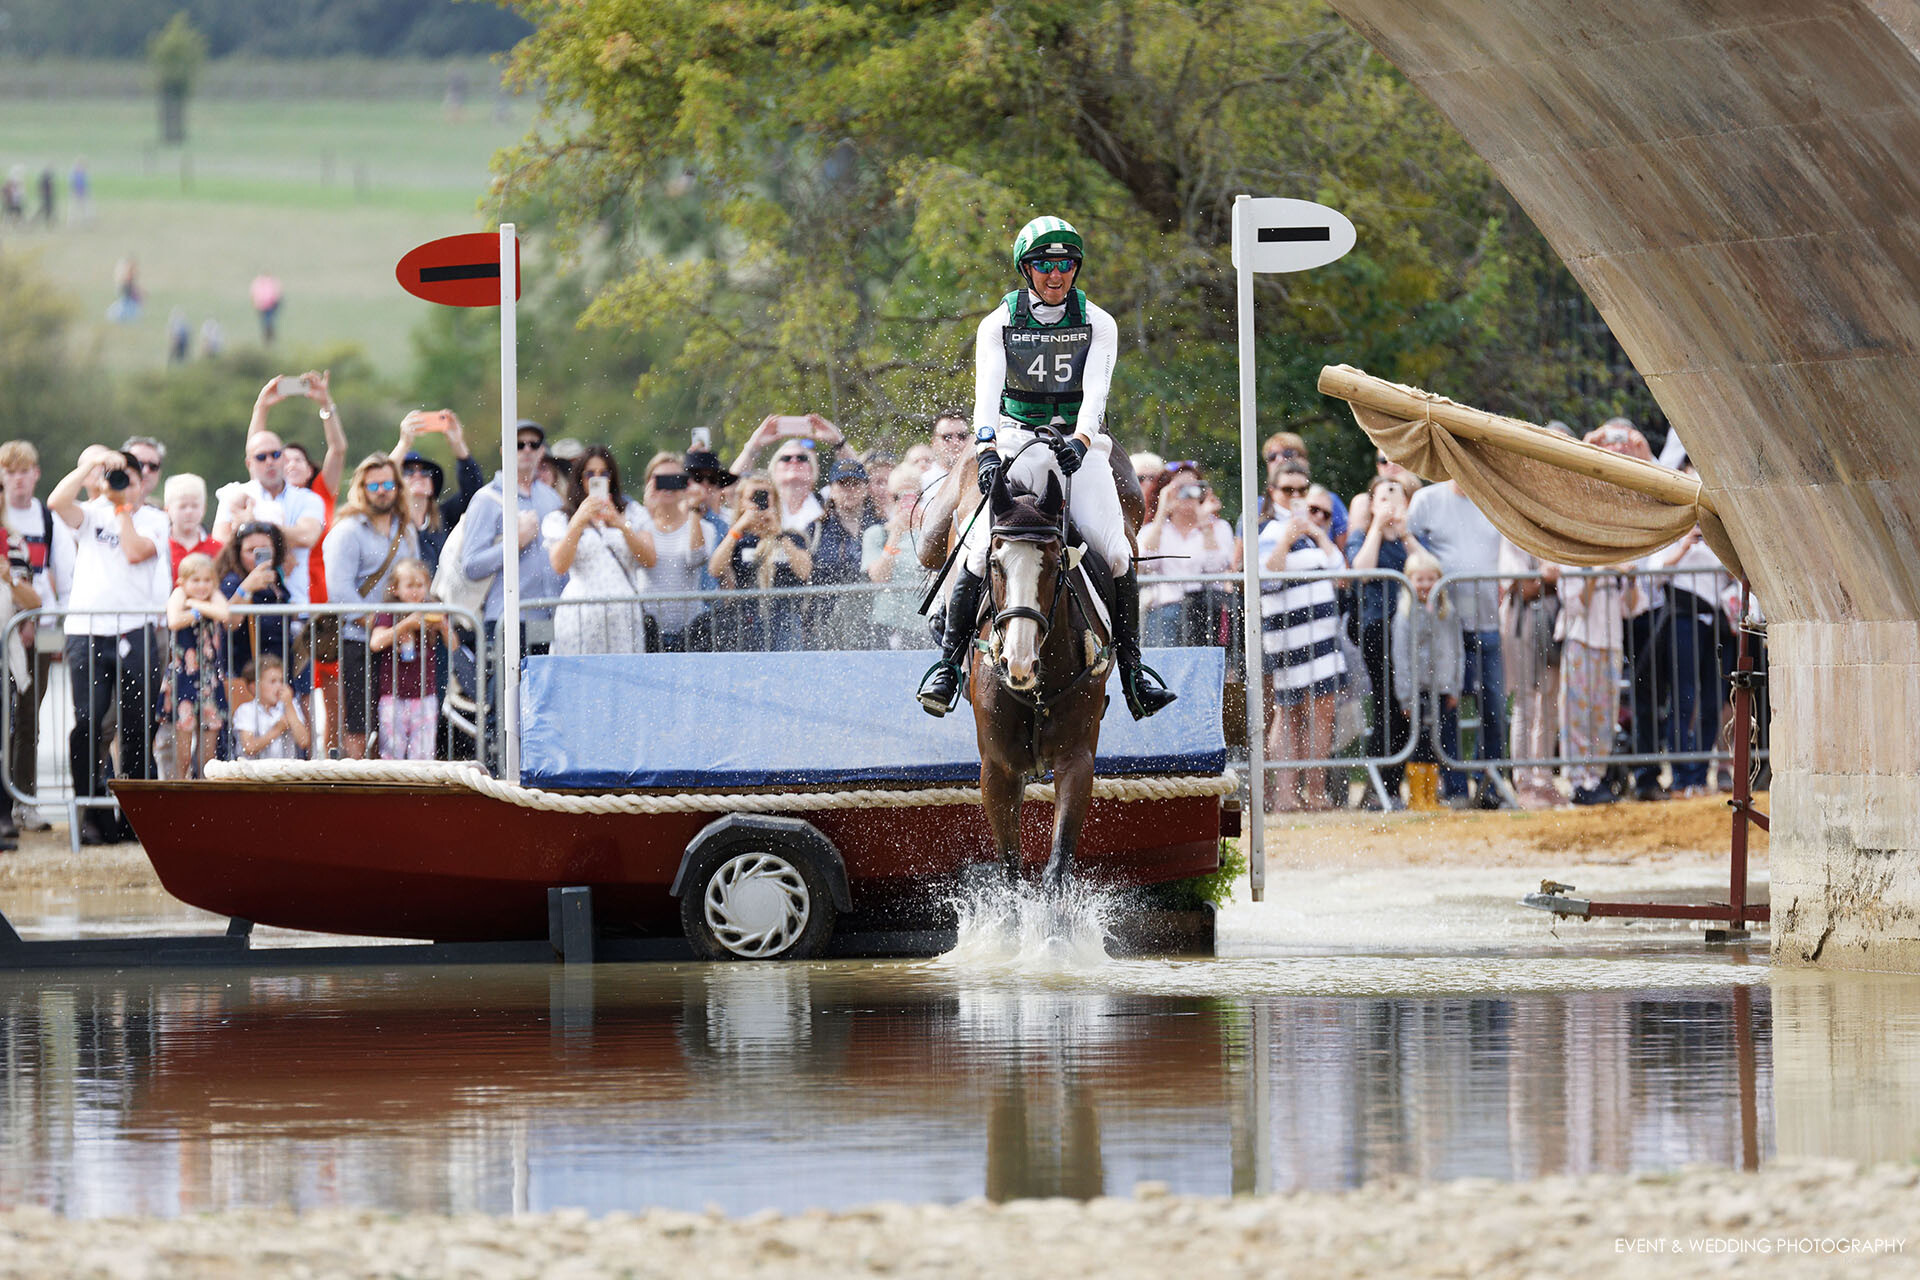 Michael Owen & Bradeley Law land in the water at Lion Bridge at the 2022 Burghley Horse Trials